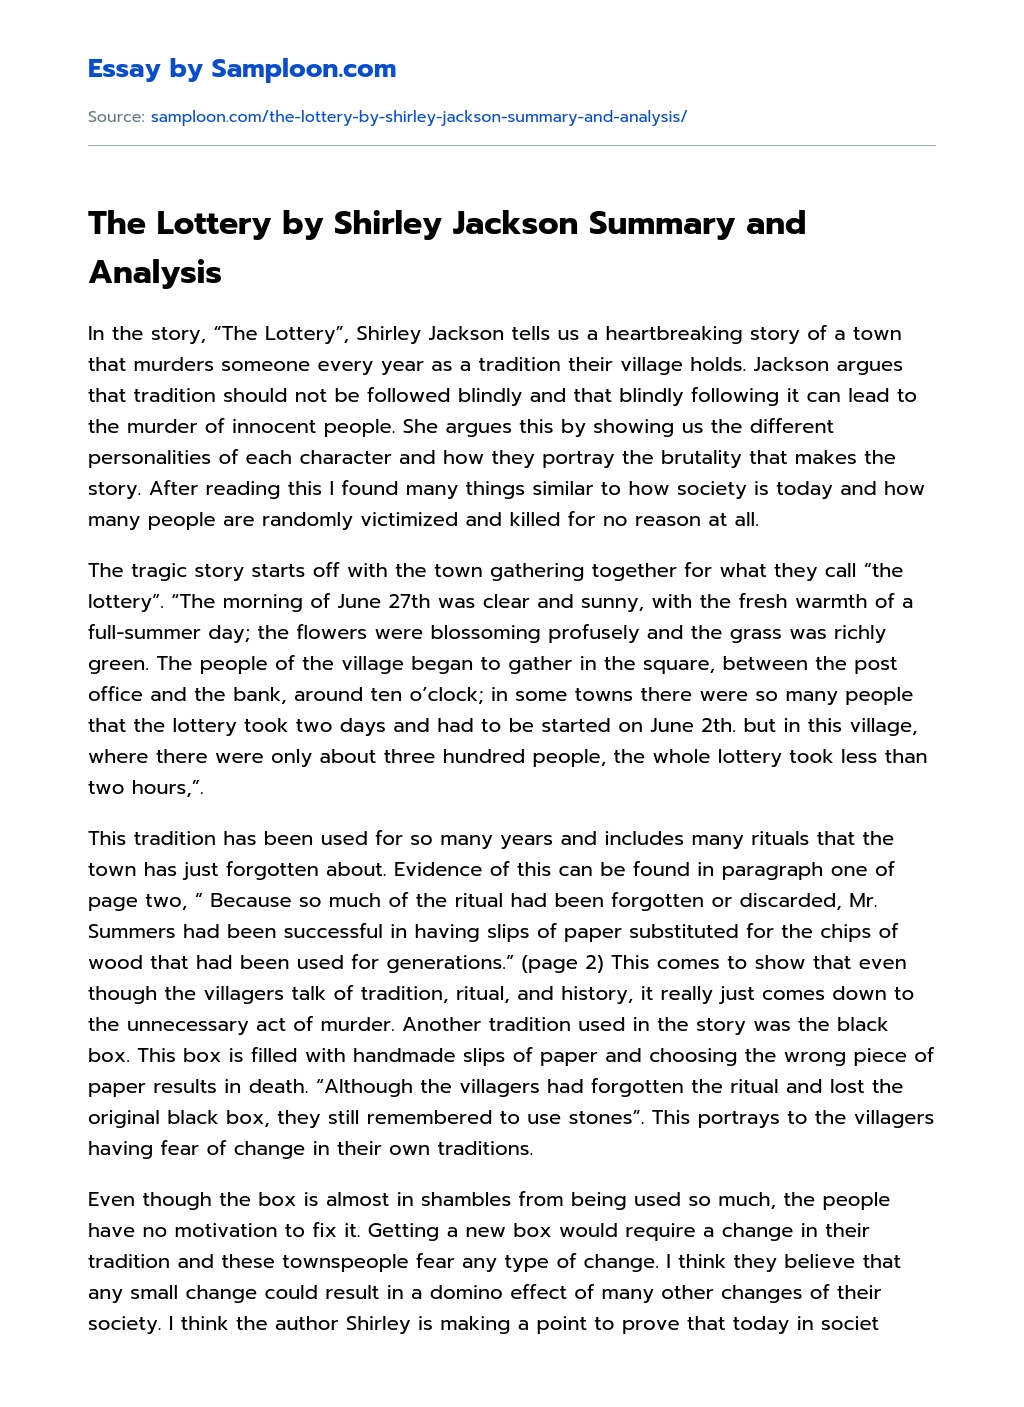 the lottery by shirley jackson analysis essay